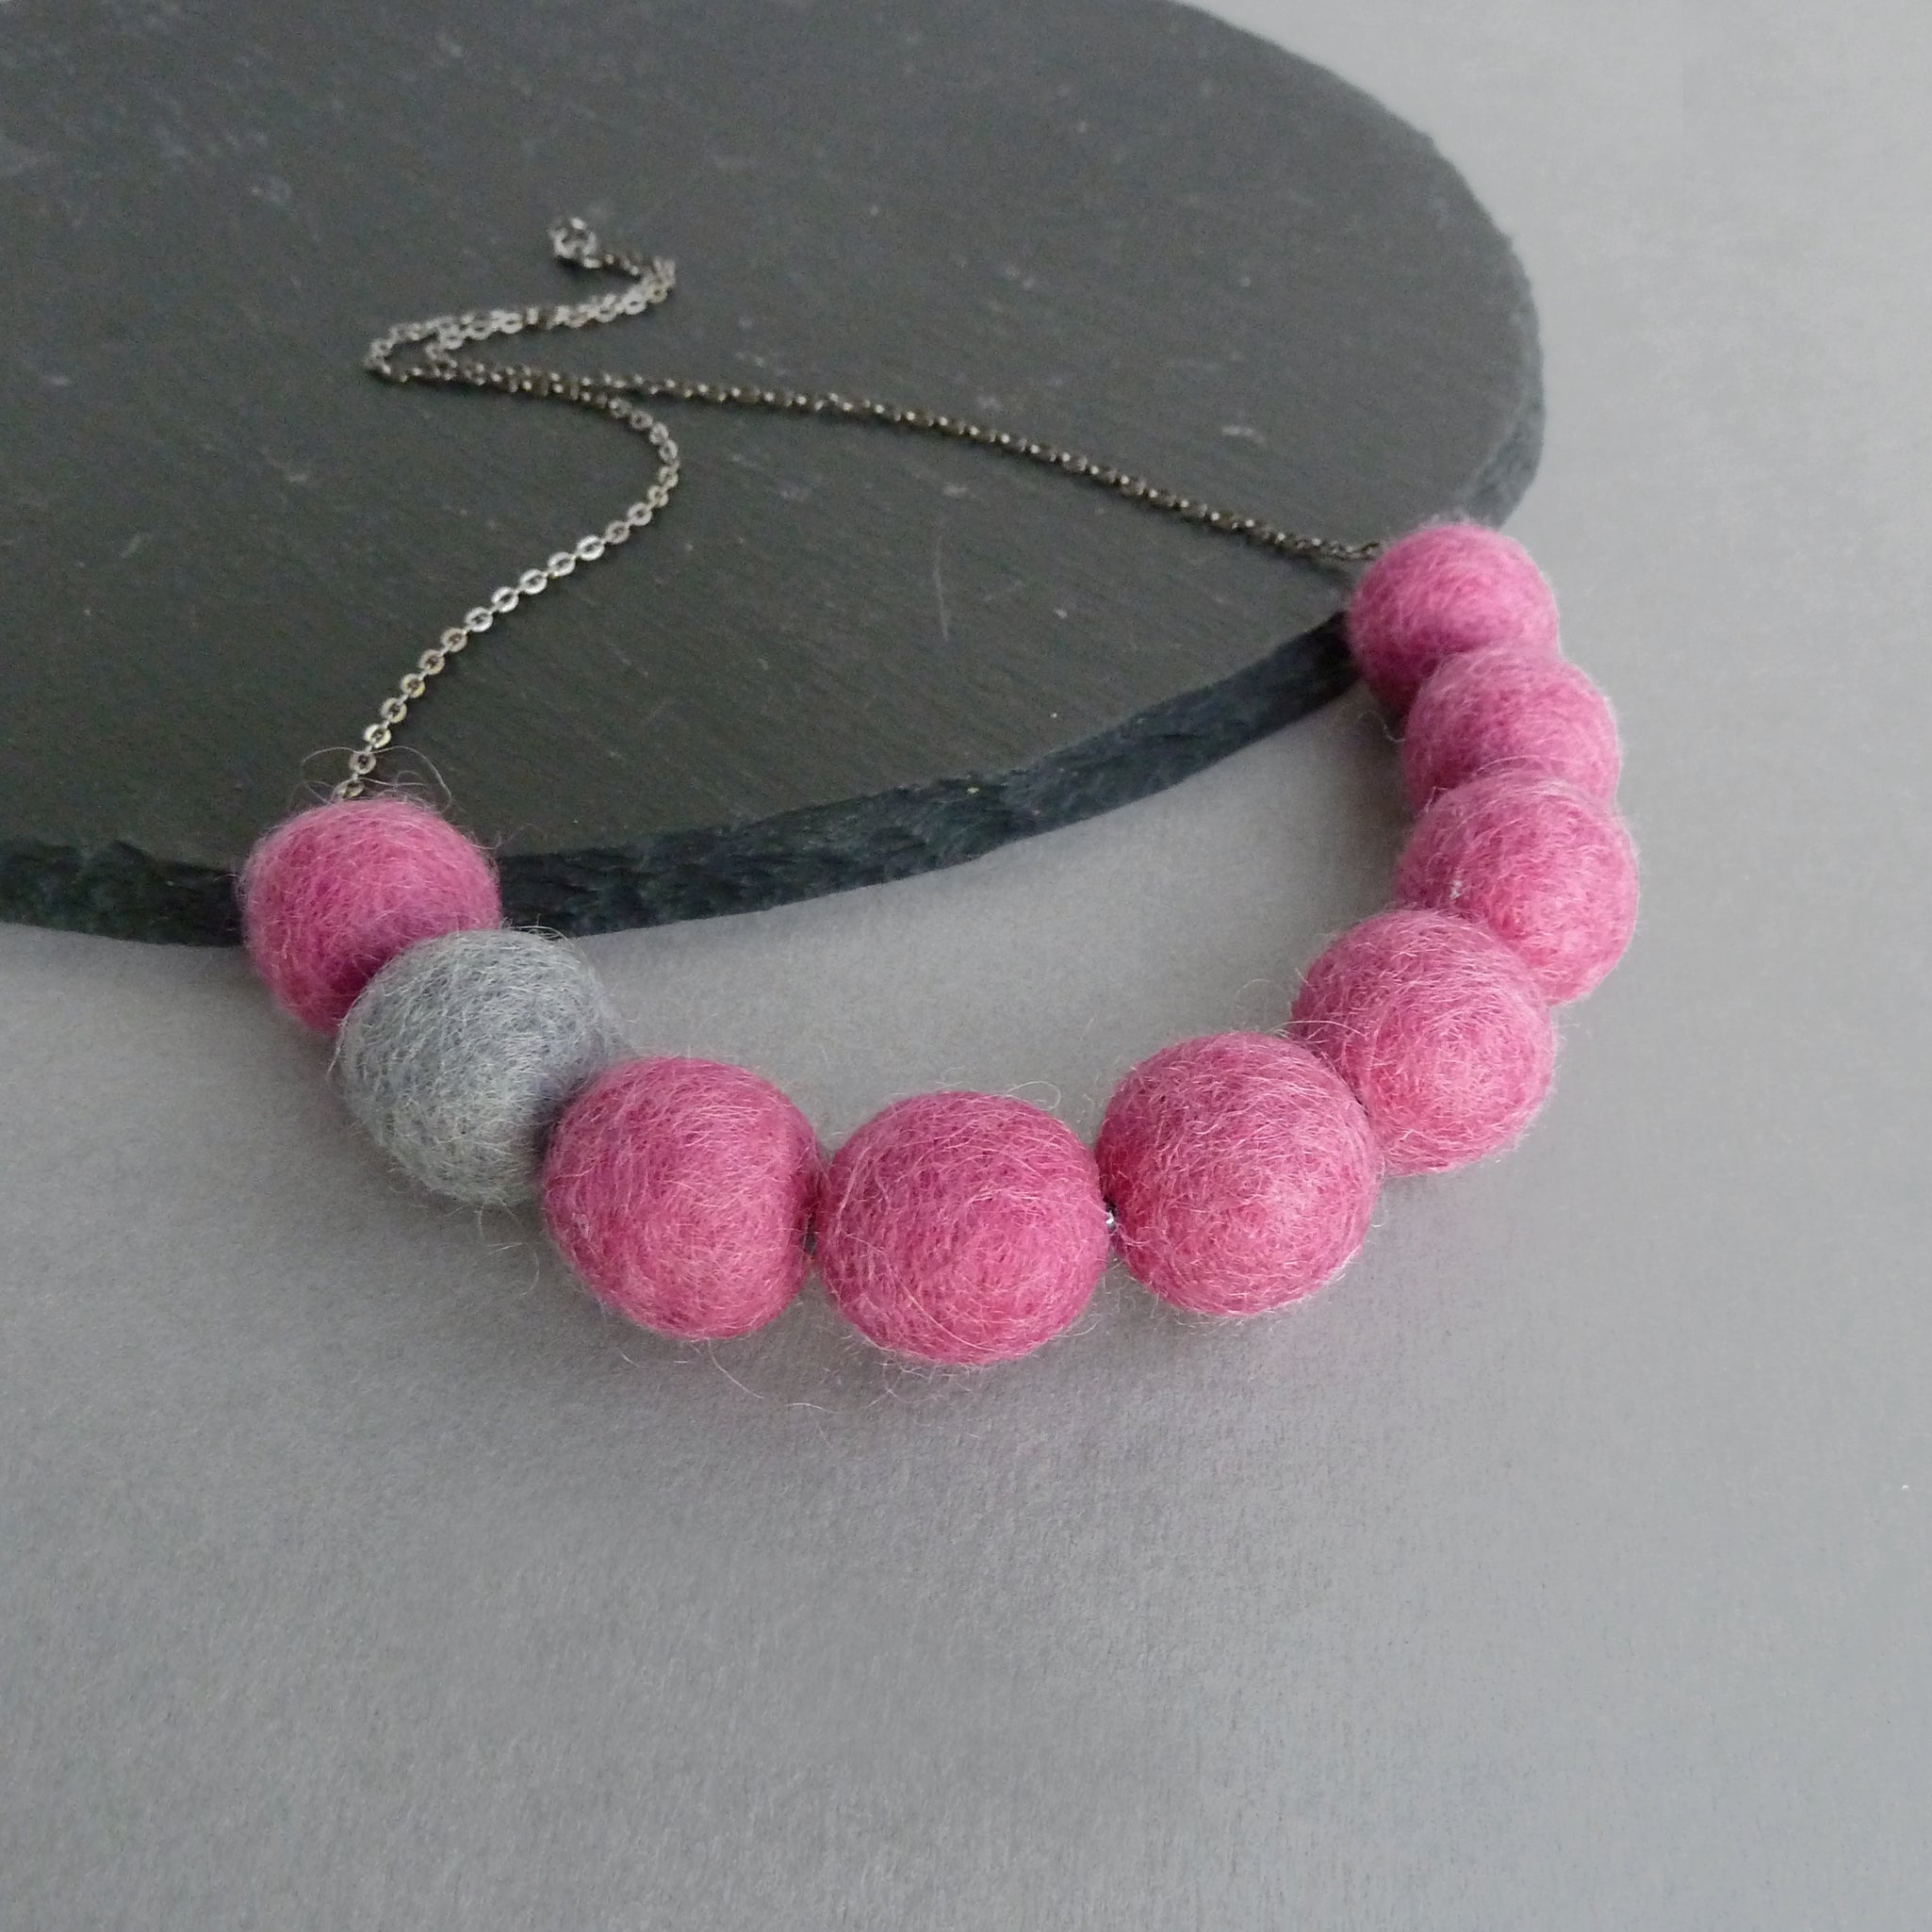 Colourful Silicone Beaded Necklaces to accessorise your new outfit